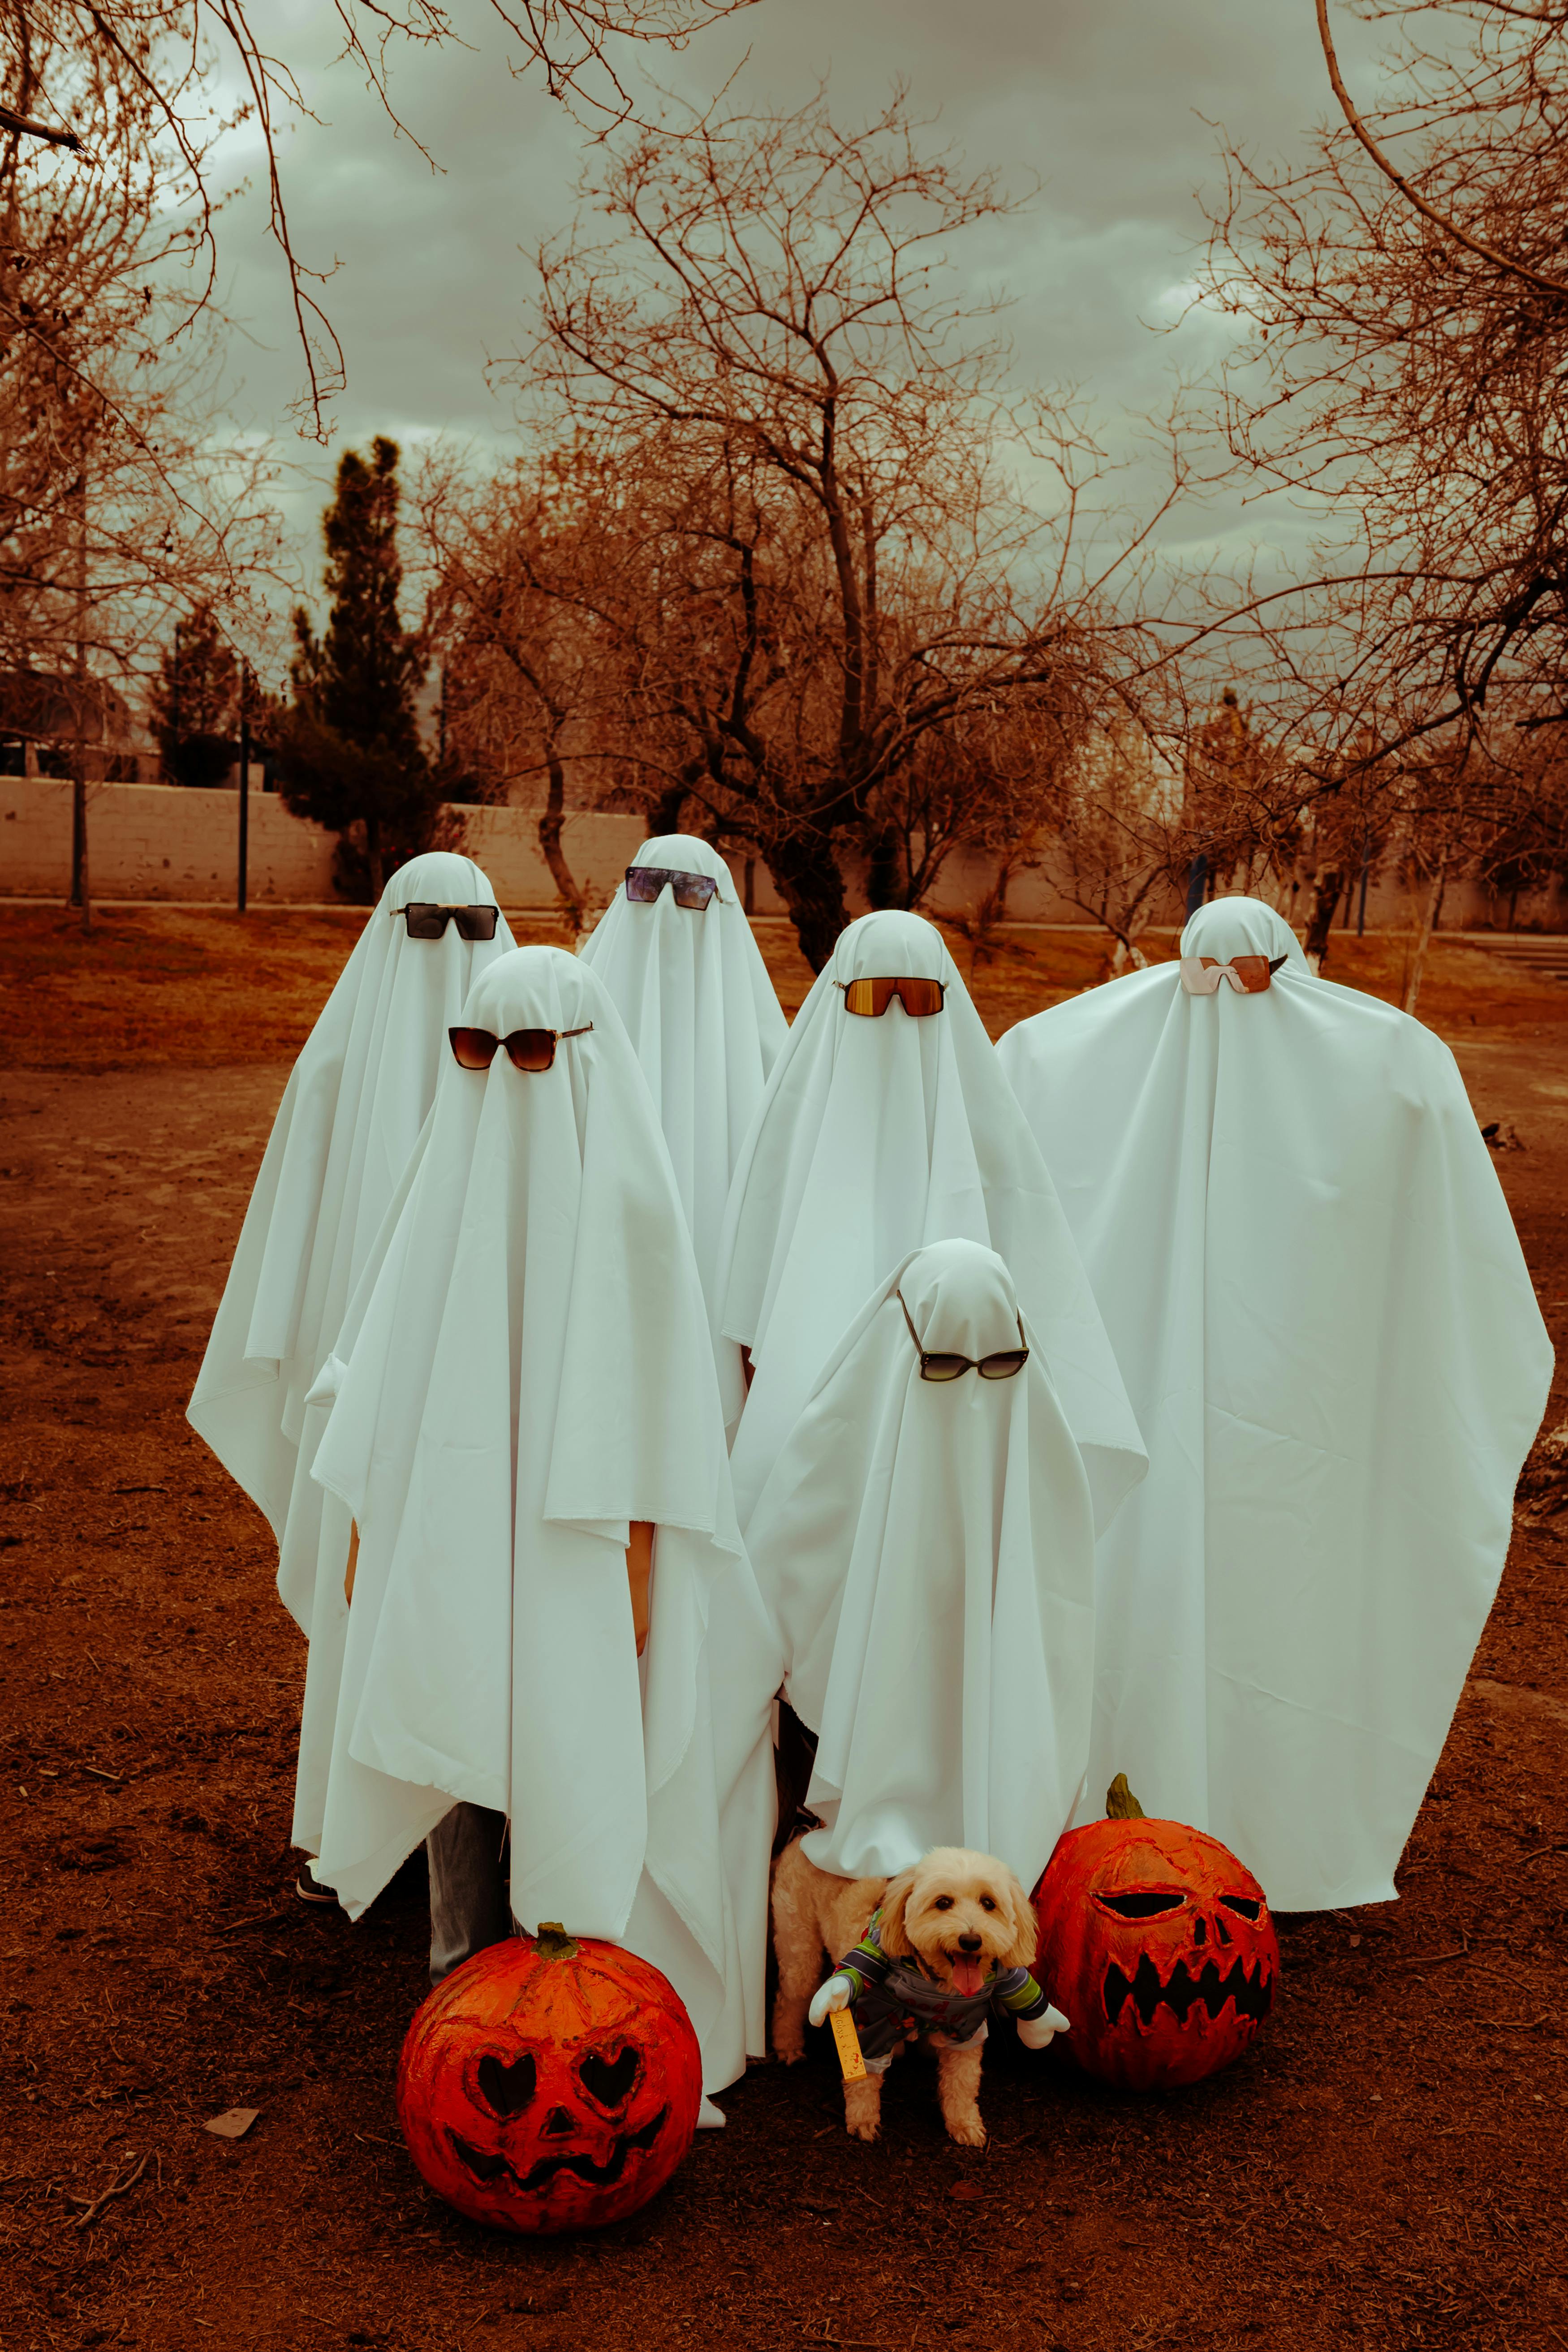 children dressed as ghosts in sunglasses with a dog in the park